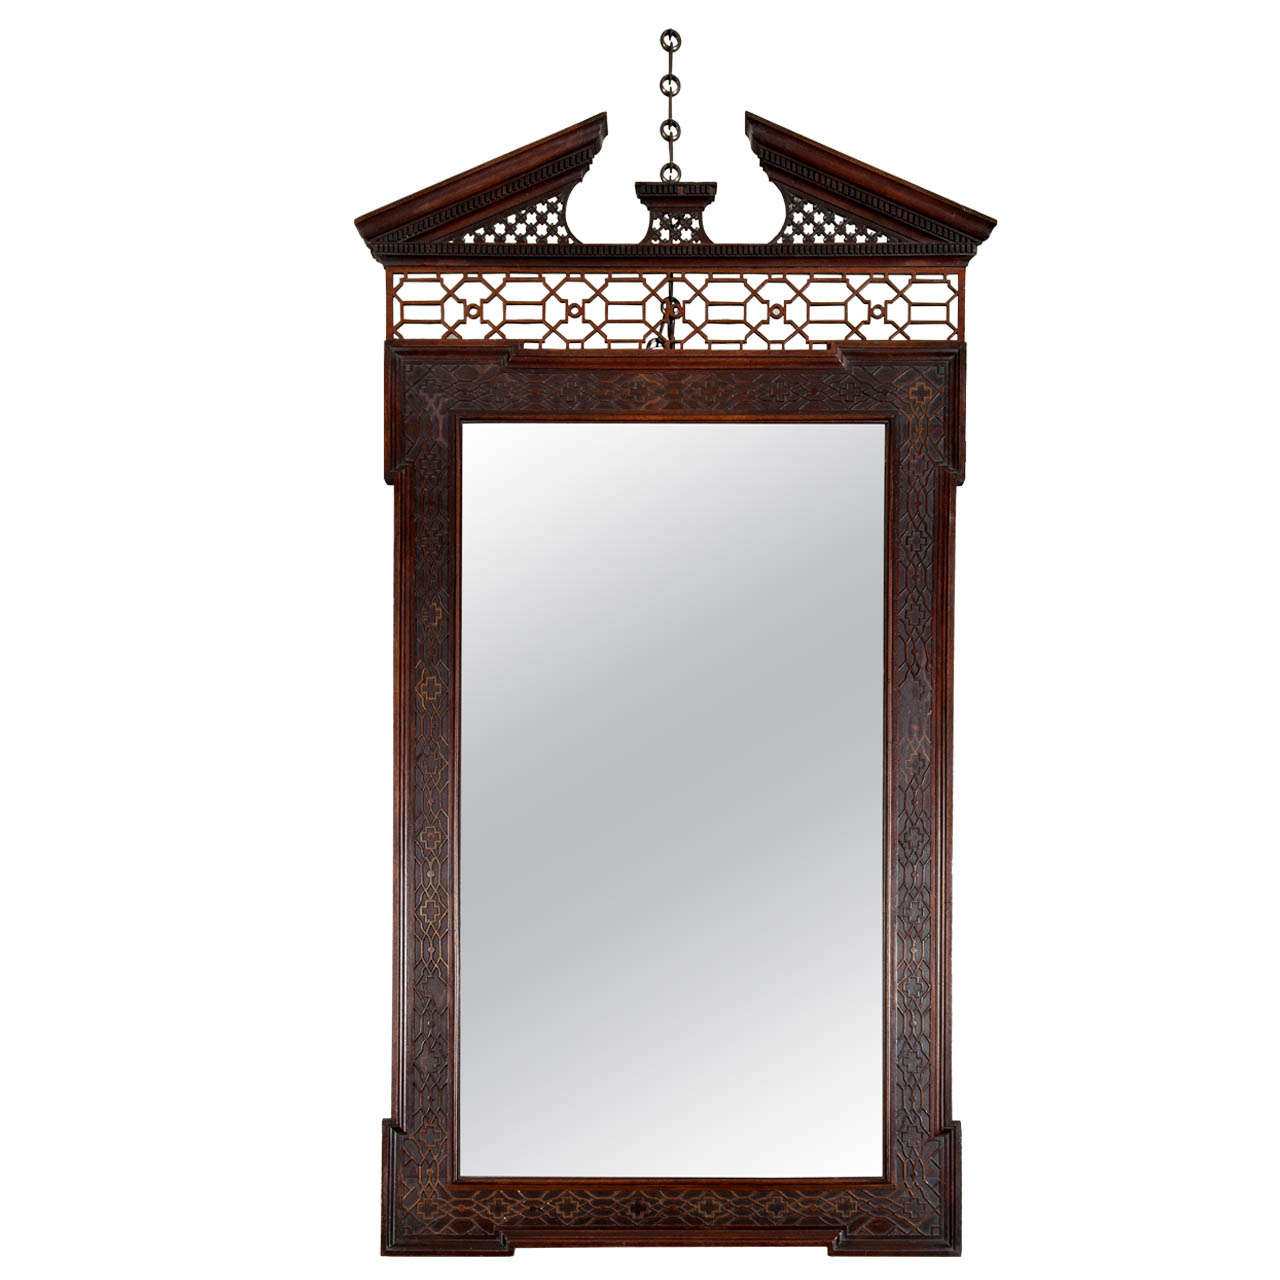 Extremely Rare Chippendale Period Mahogany Pier Mirror